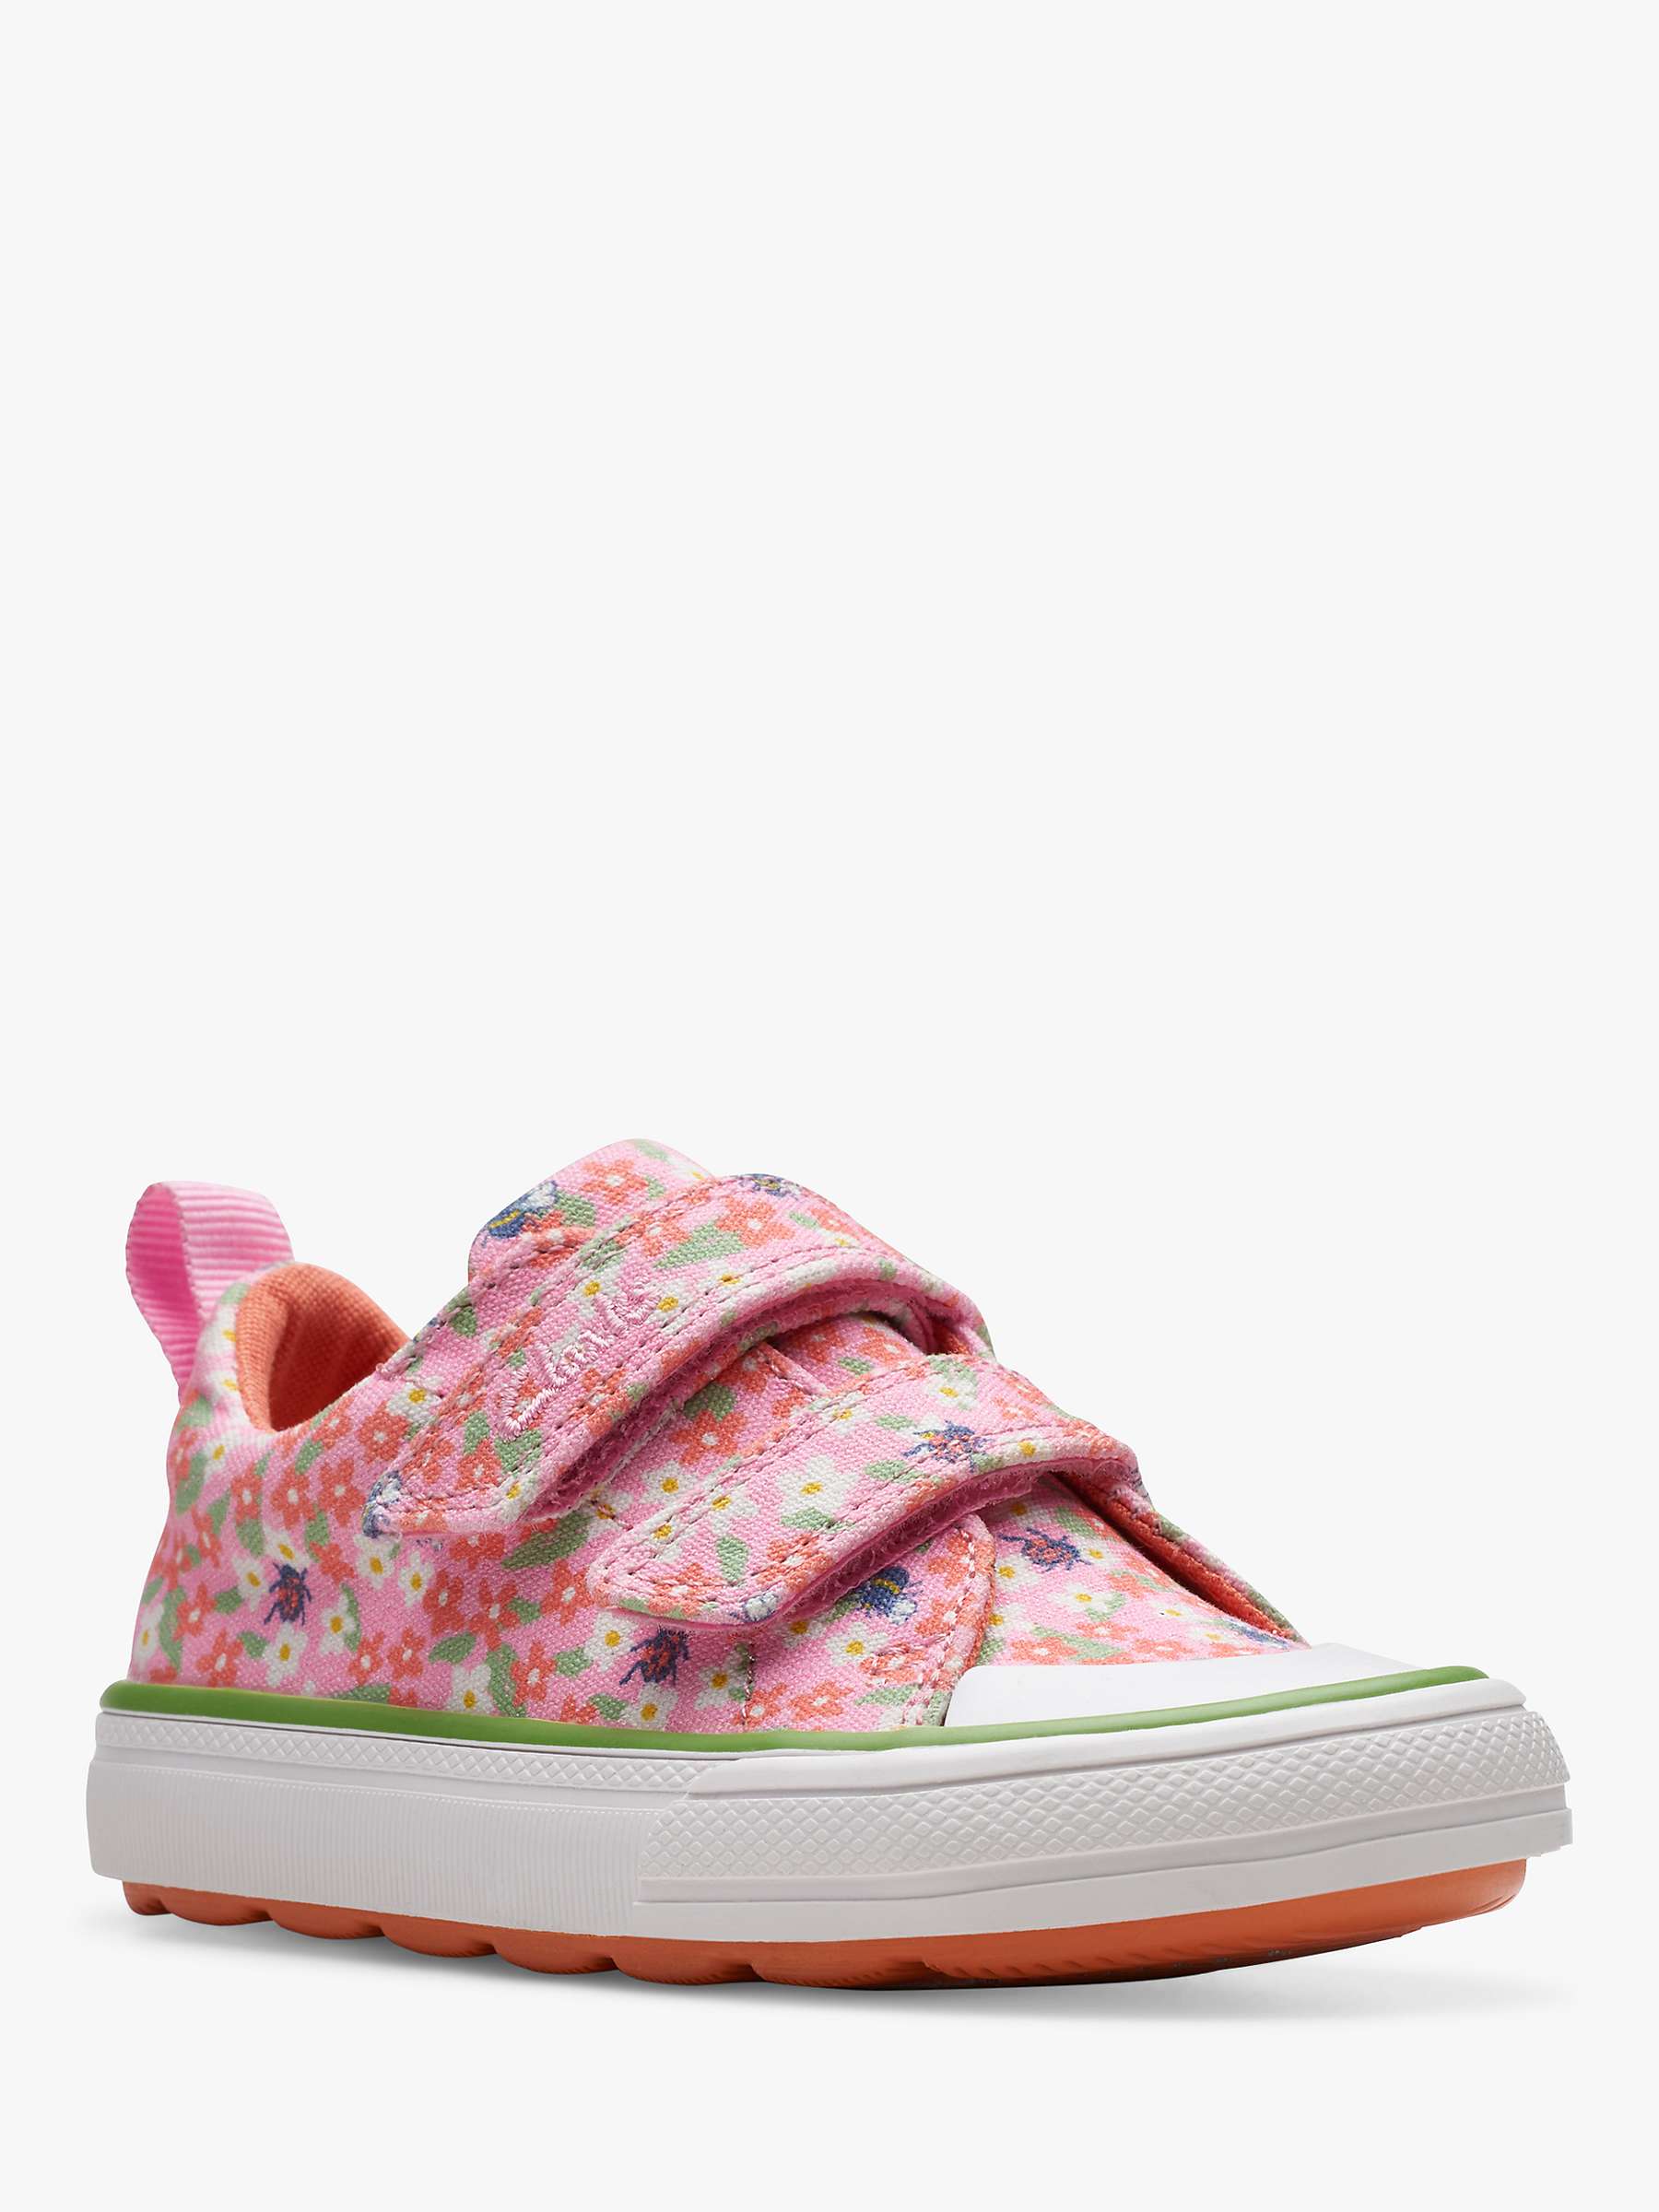 Buy Clarks Kids' Foxing Posey Canvas Shoes, Pink/Multi Online at johnlewis.com